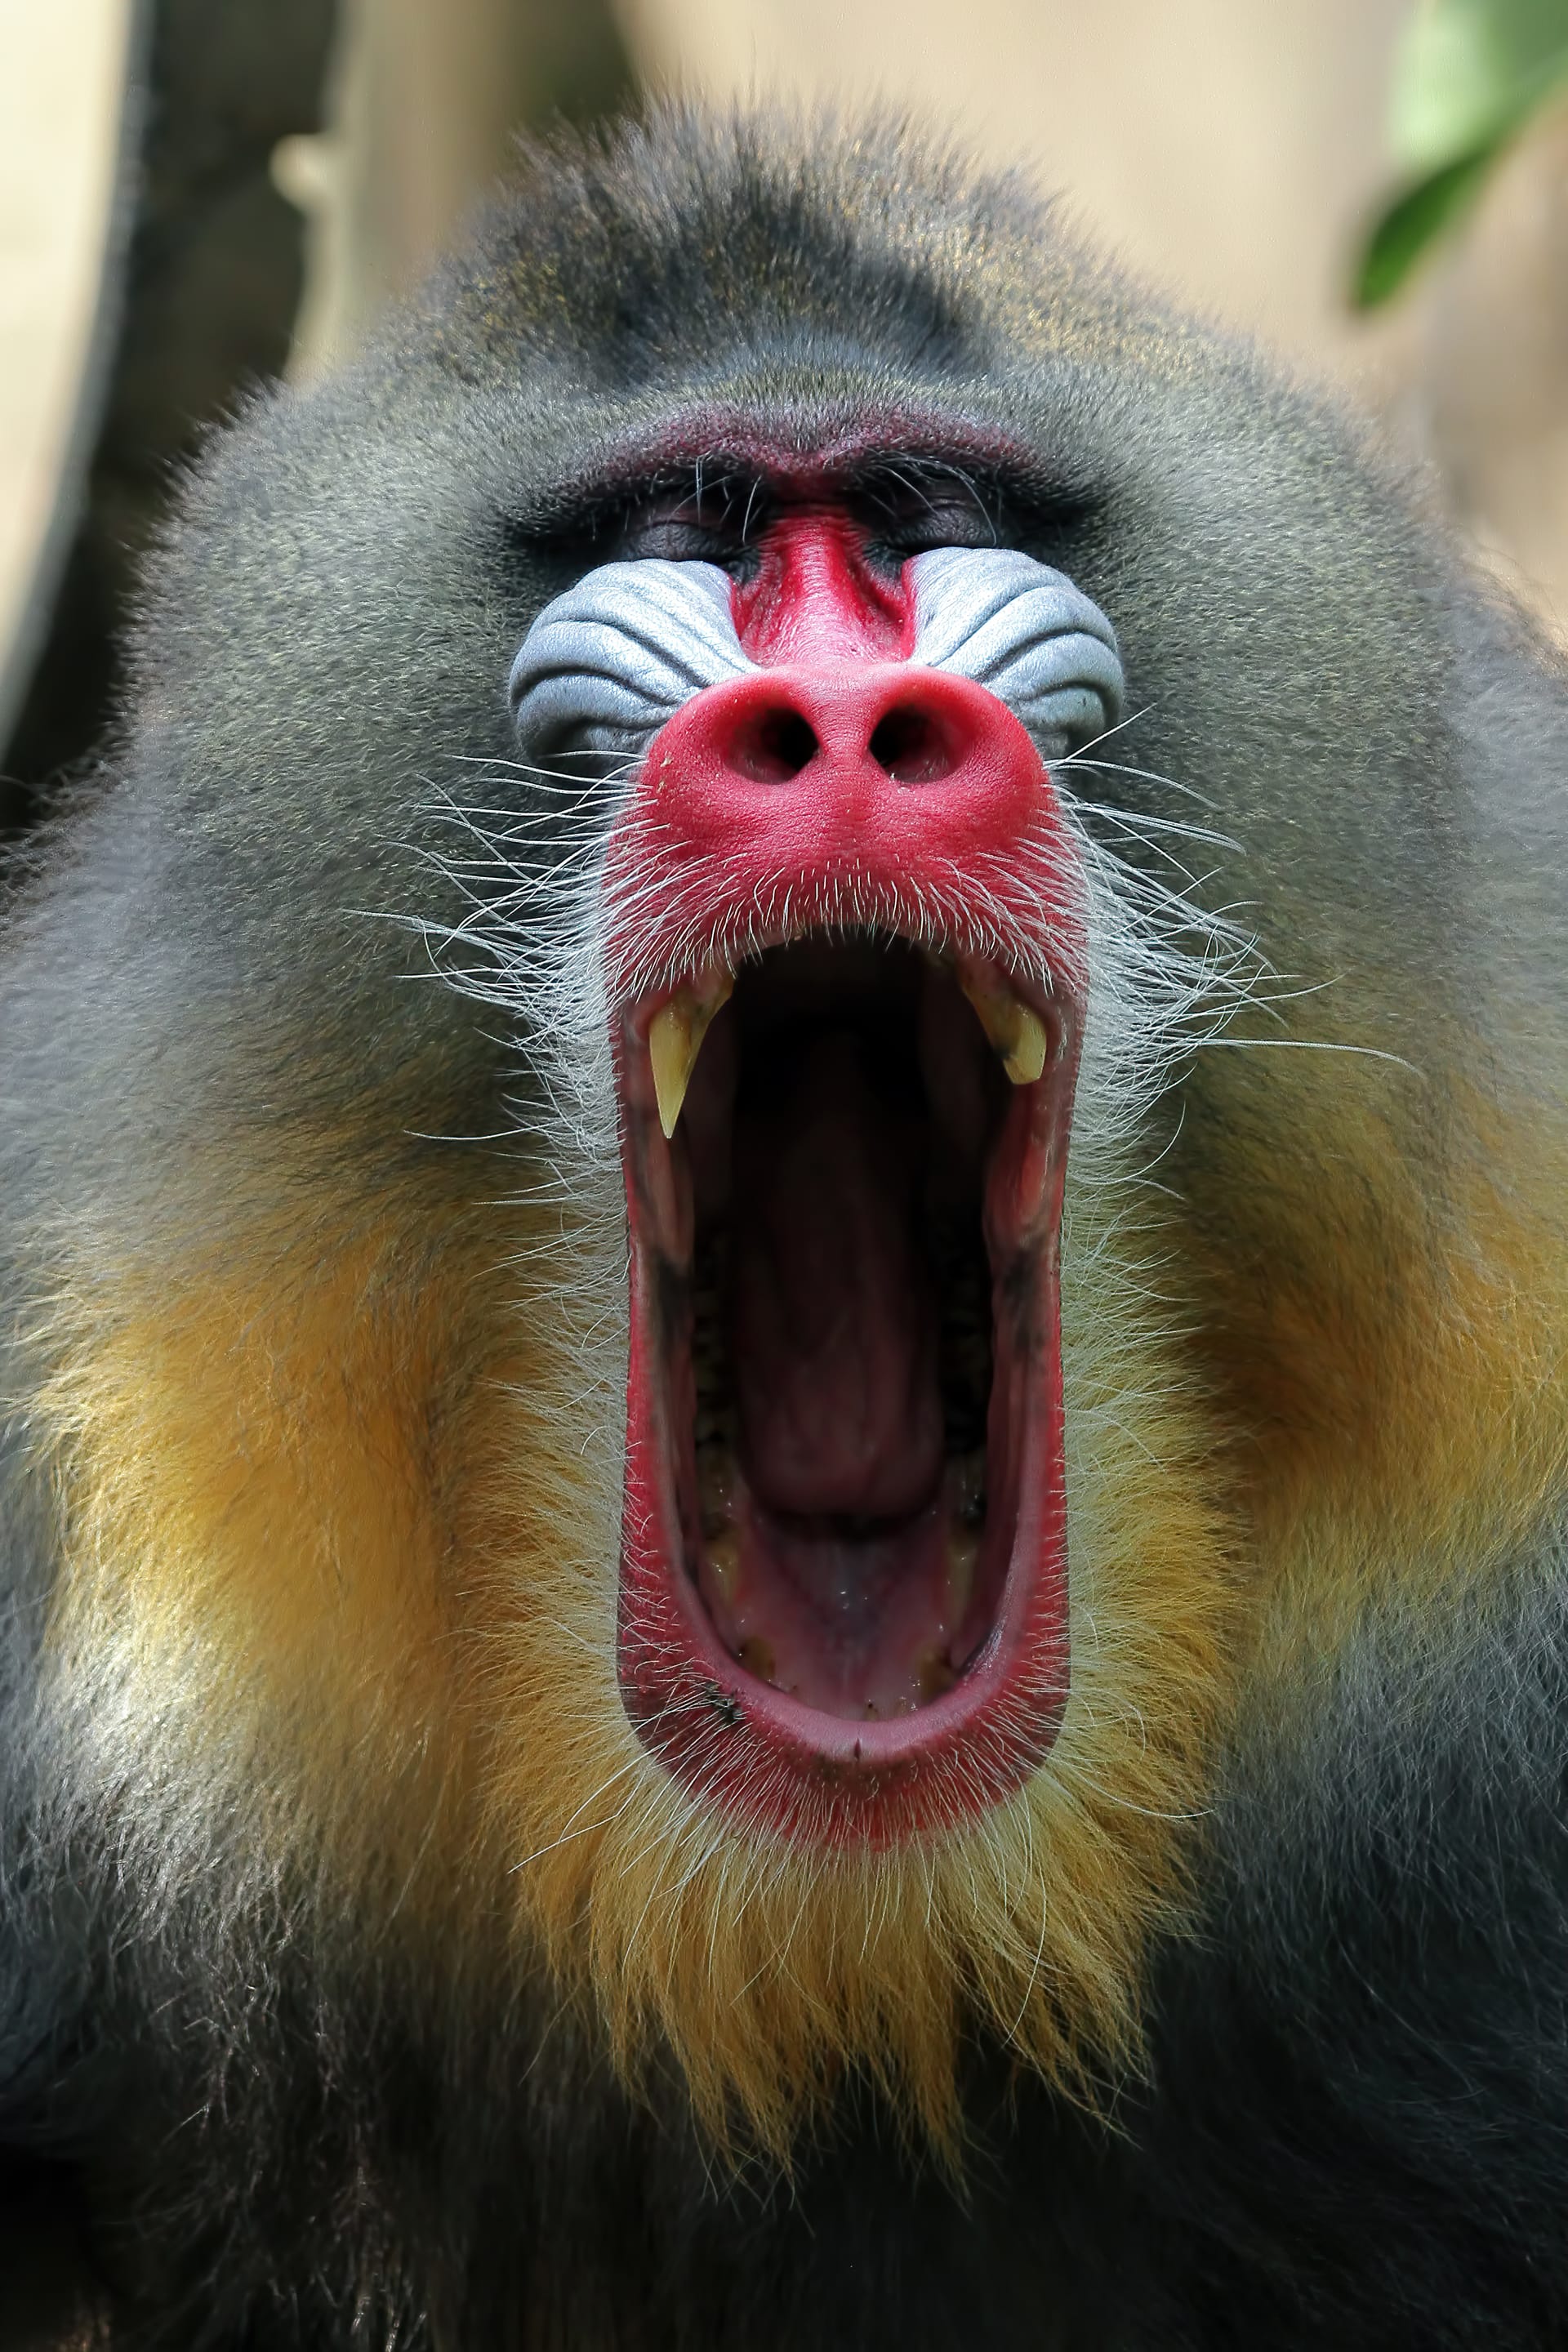 Monkey closeup face with open mouth mandrillus sphinx animal closeup